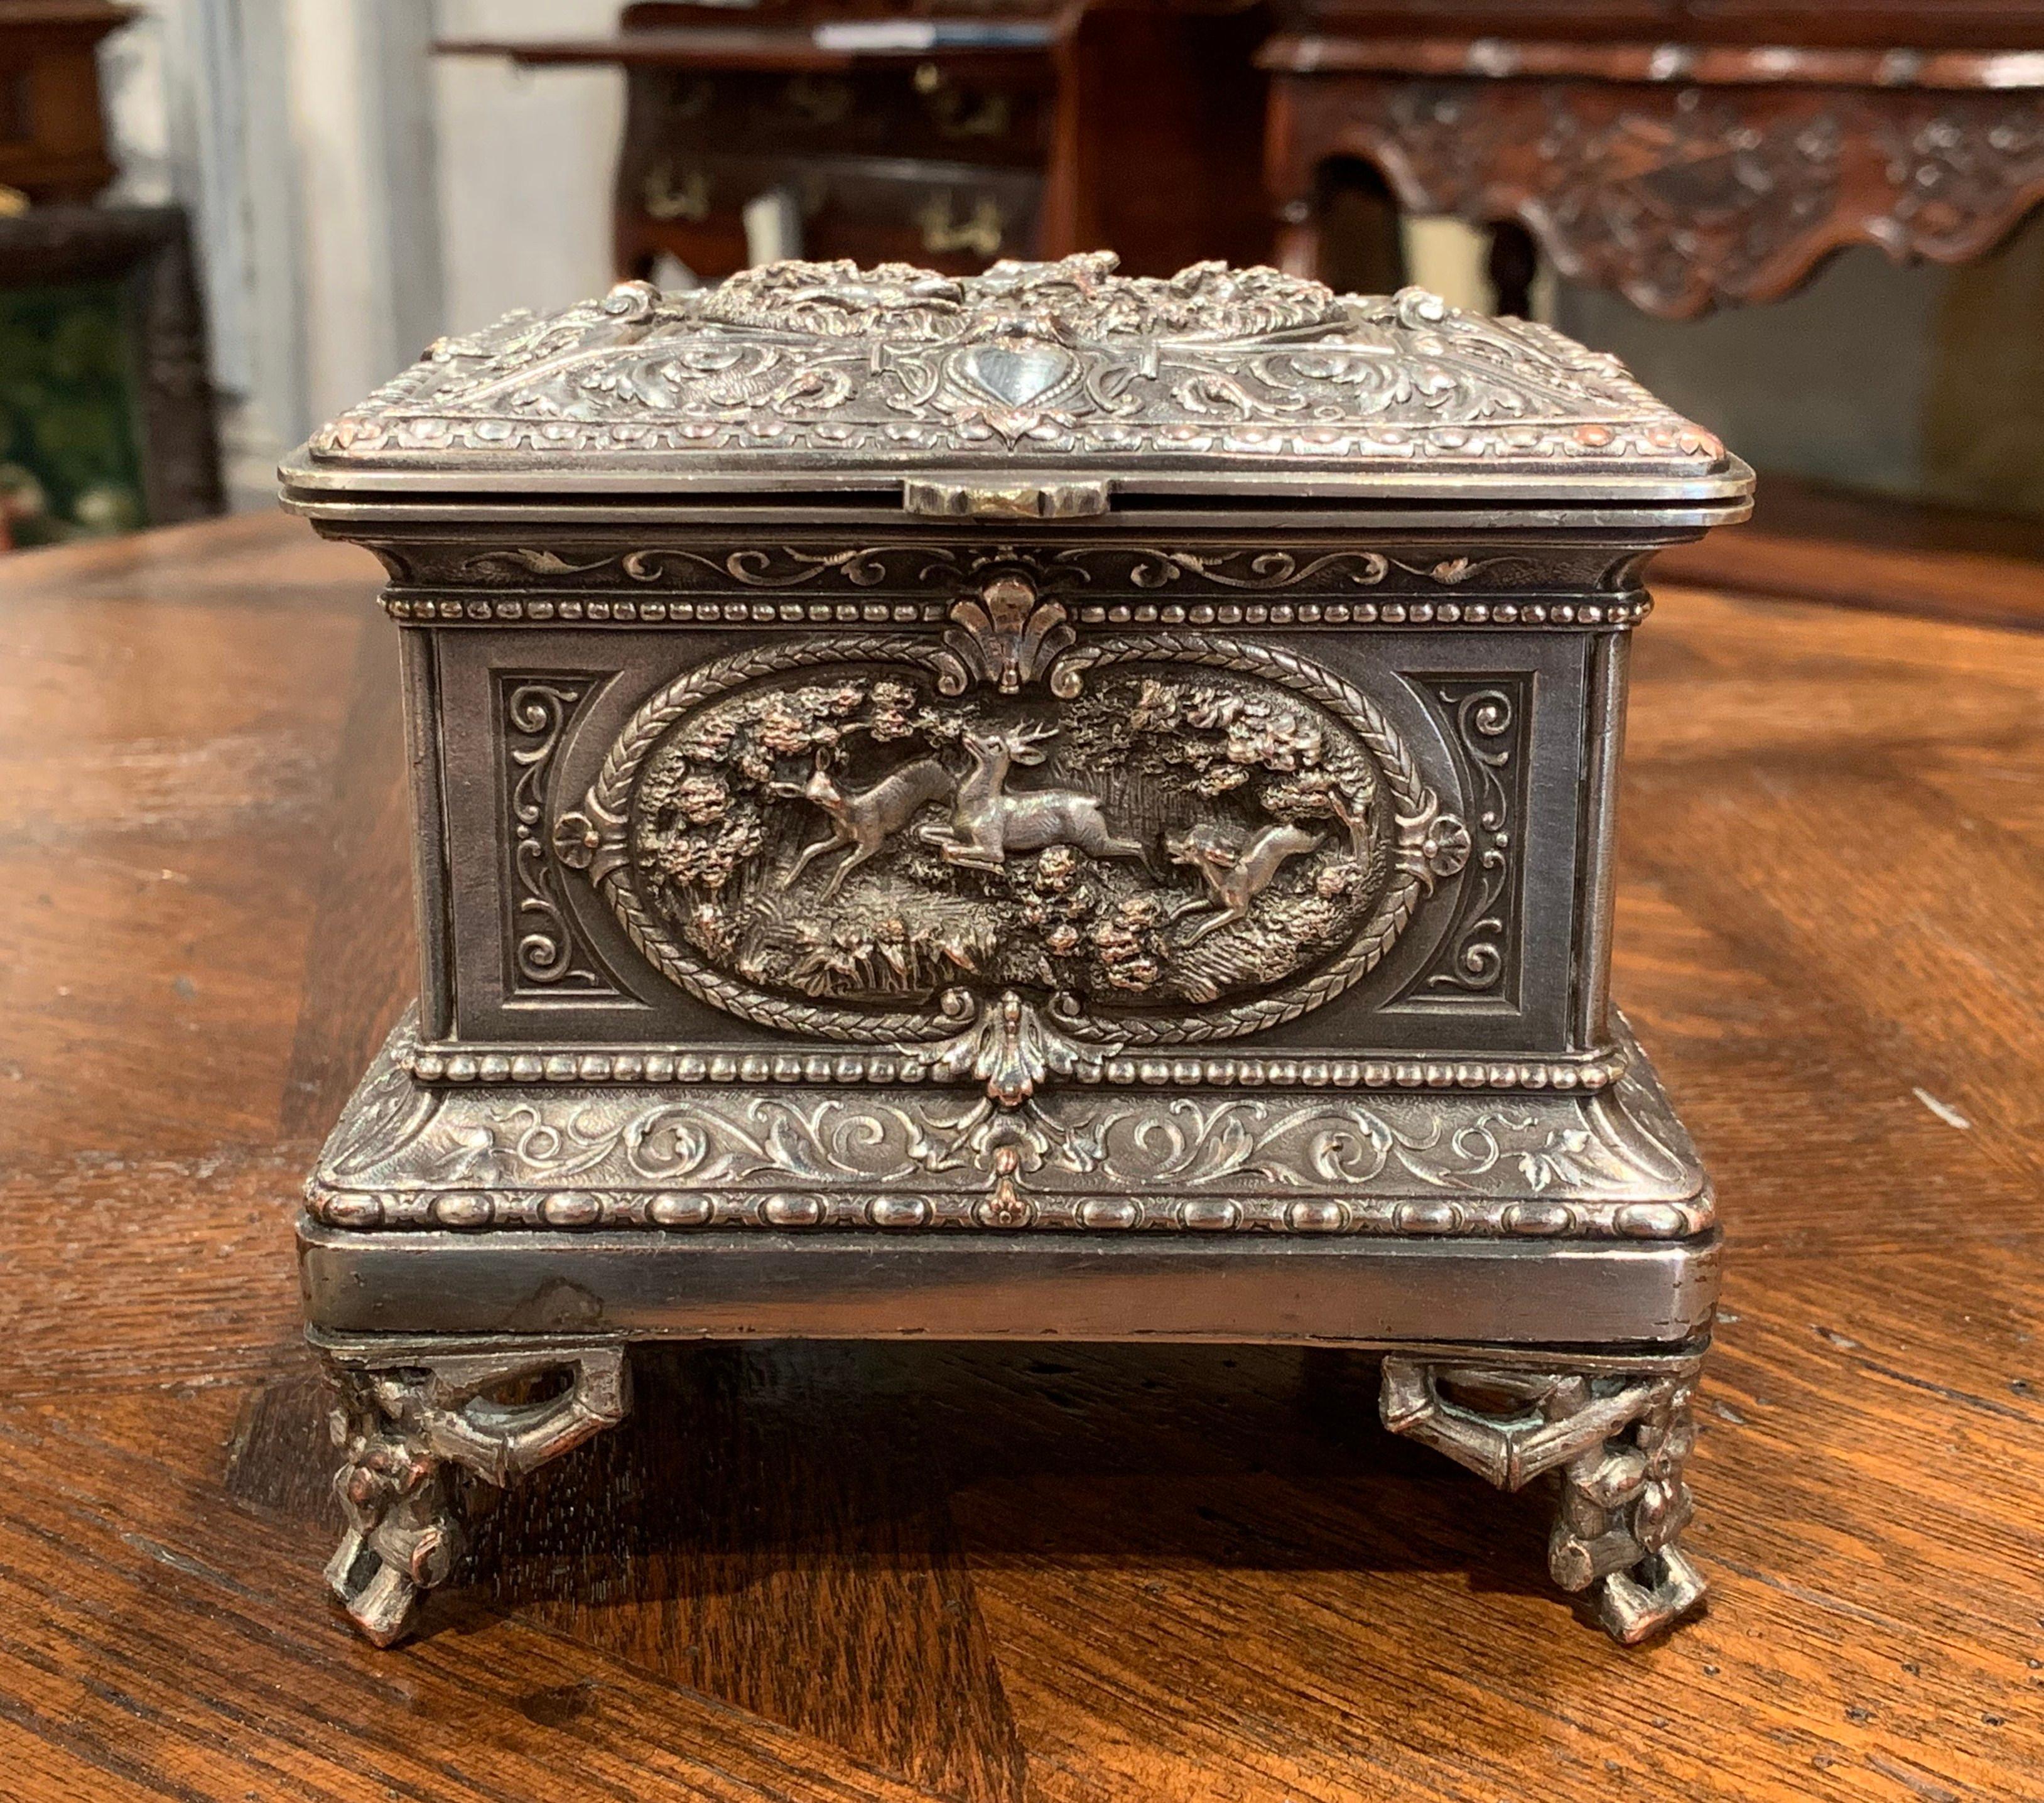 Place this elegant, antique Napoleon III copper box in your master bath to keep your jewelry safe and organized. Crafted in France, circa 1880, the ornate square casket sits on four scroll feet, and all five sides including the top are embellished